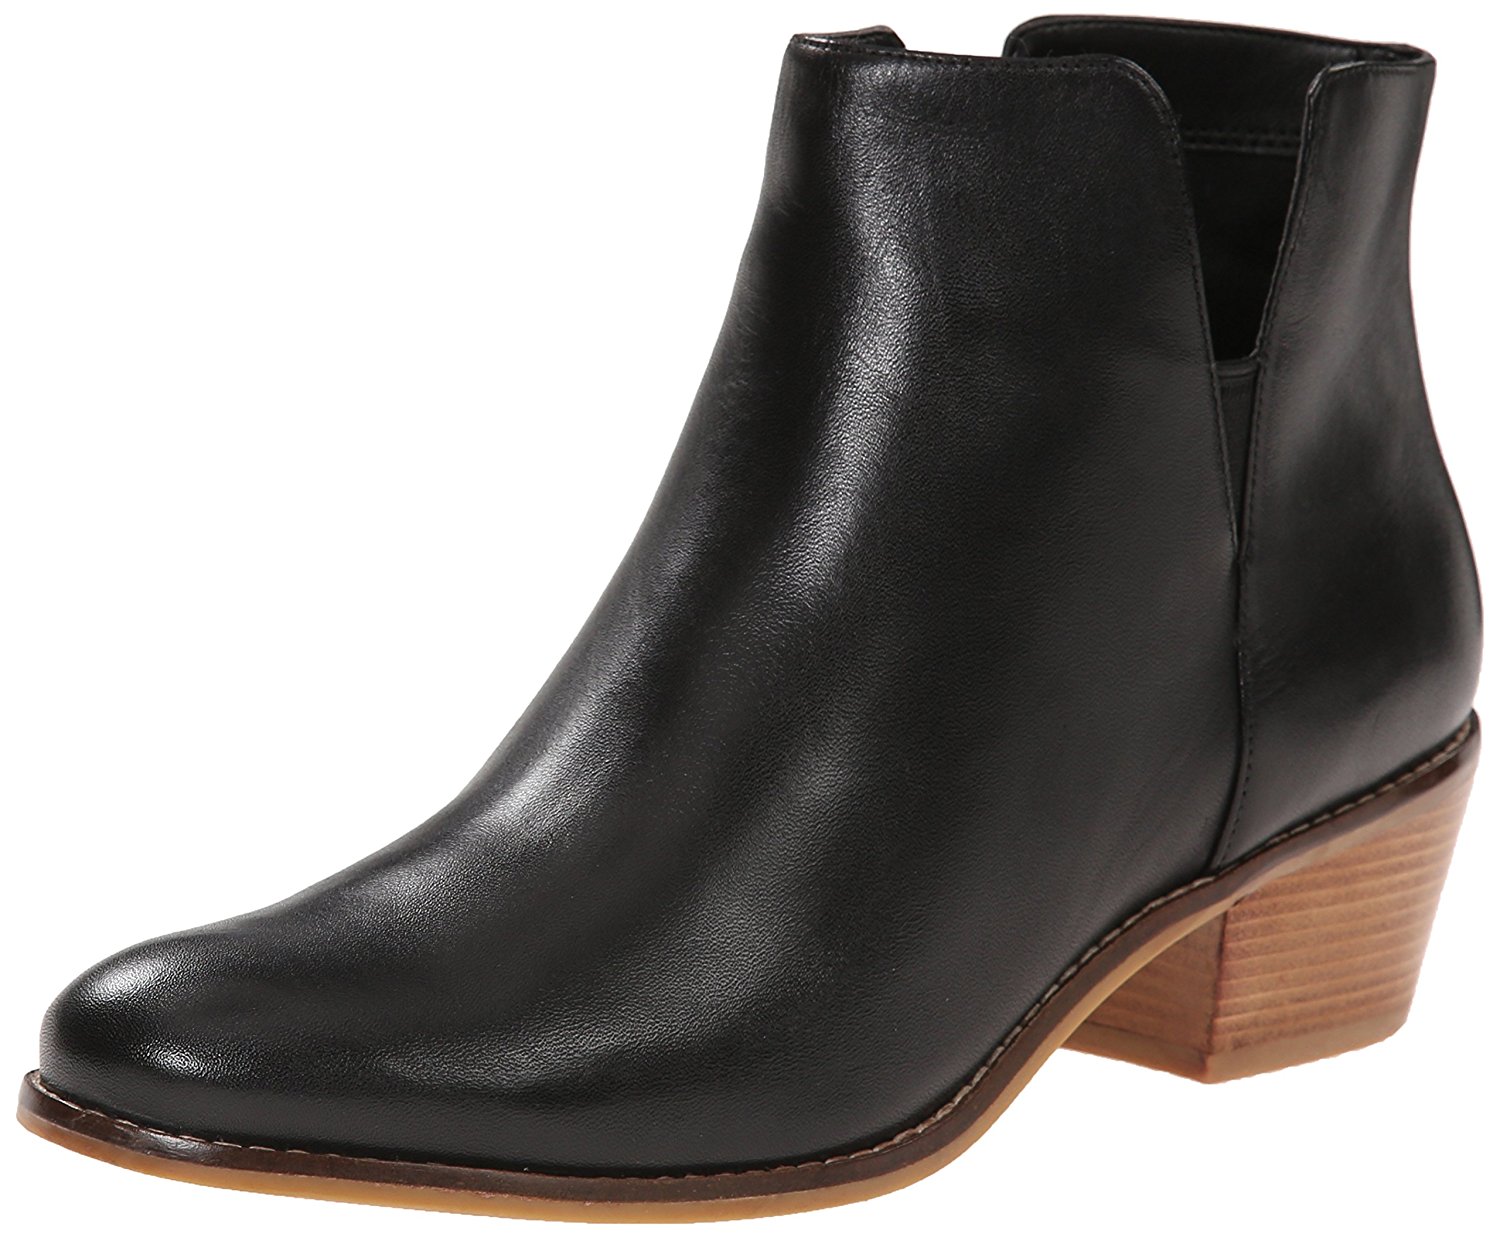 Cole Haan Womens abbot bootie Leather Almond Toe Ankle Fashion, Black, Size 8.5 | eBay